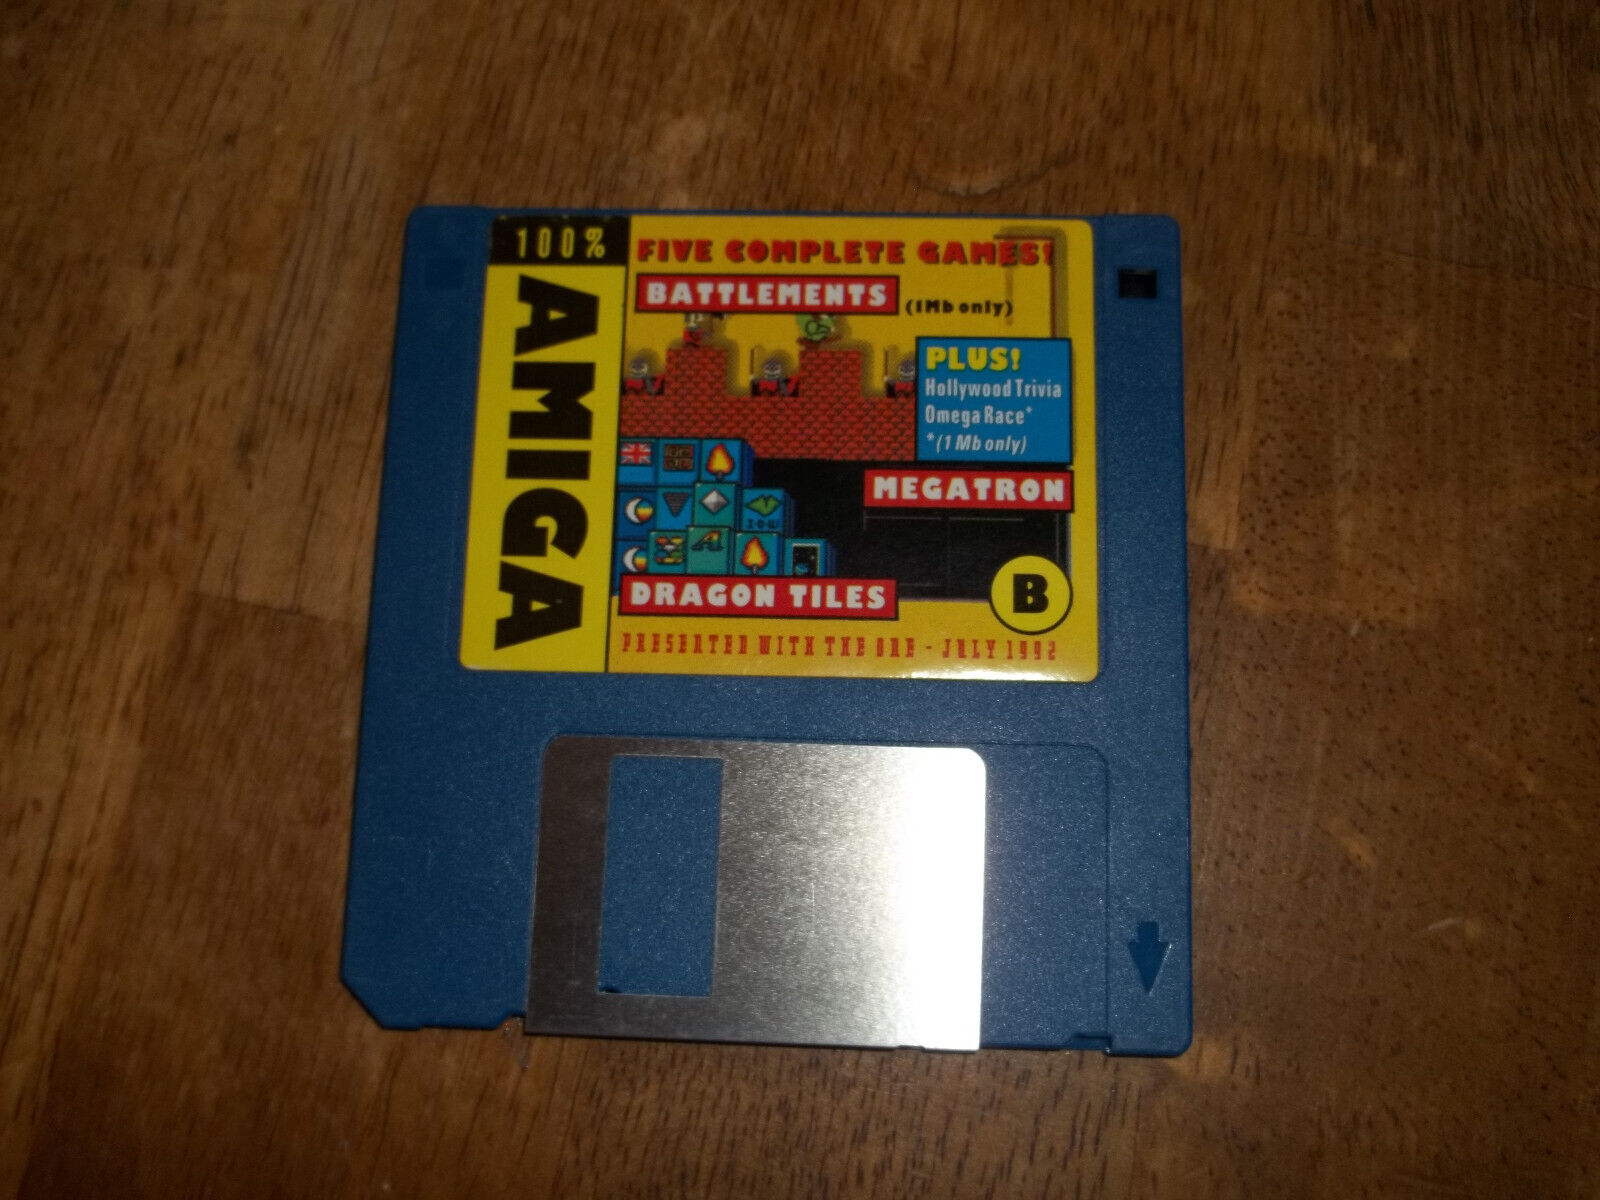 Commodore Amiga disk with 3 games on it. Battlements, Megatron and Dragon Tiles